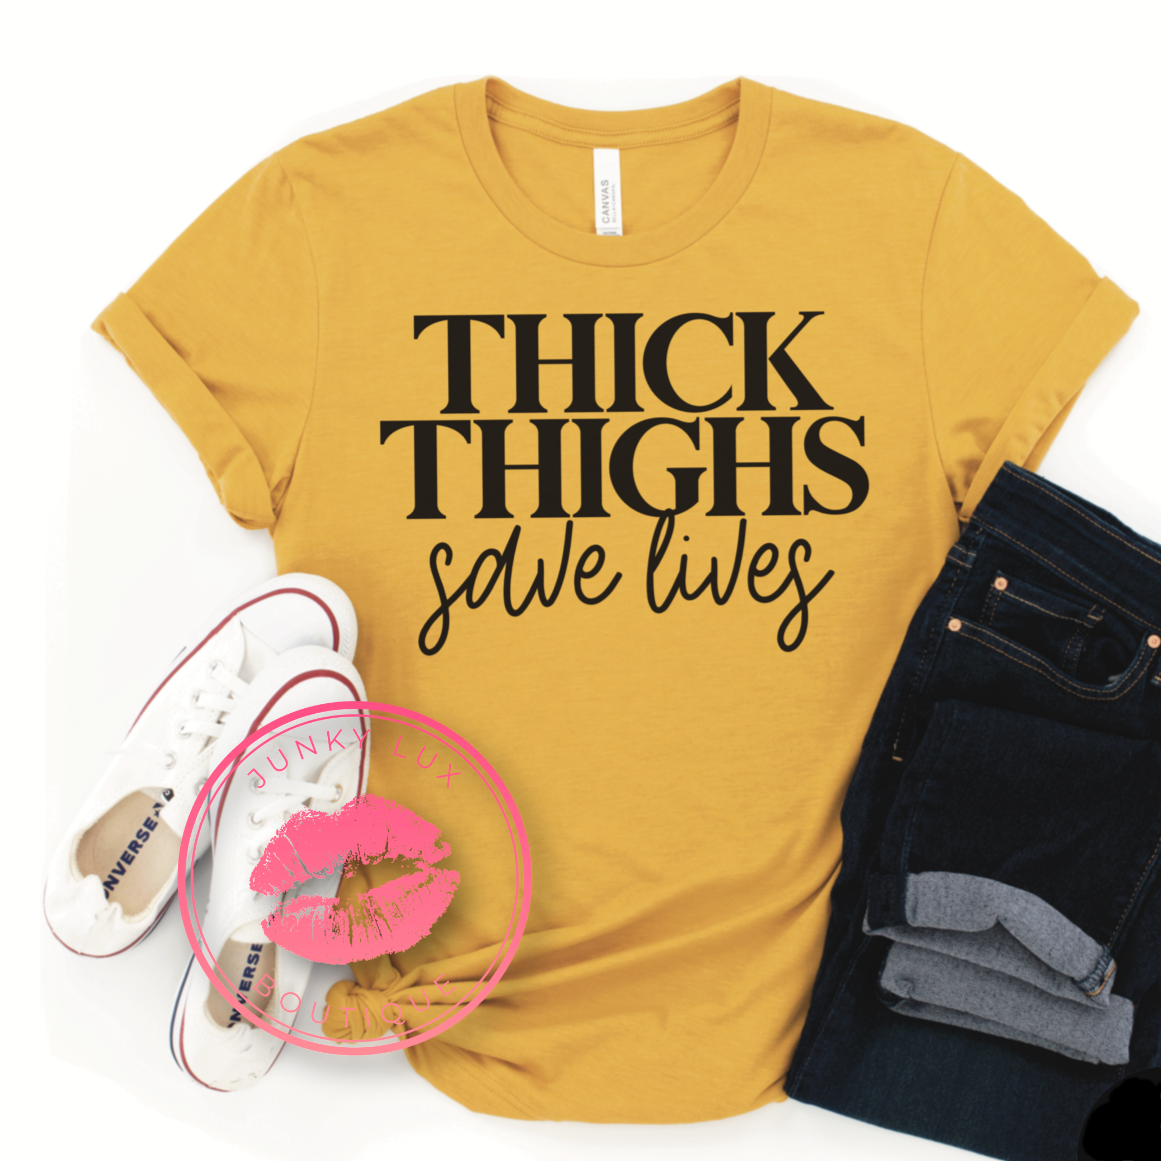 Thich Thighs Save Lives